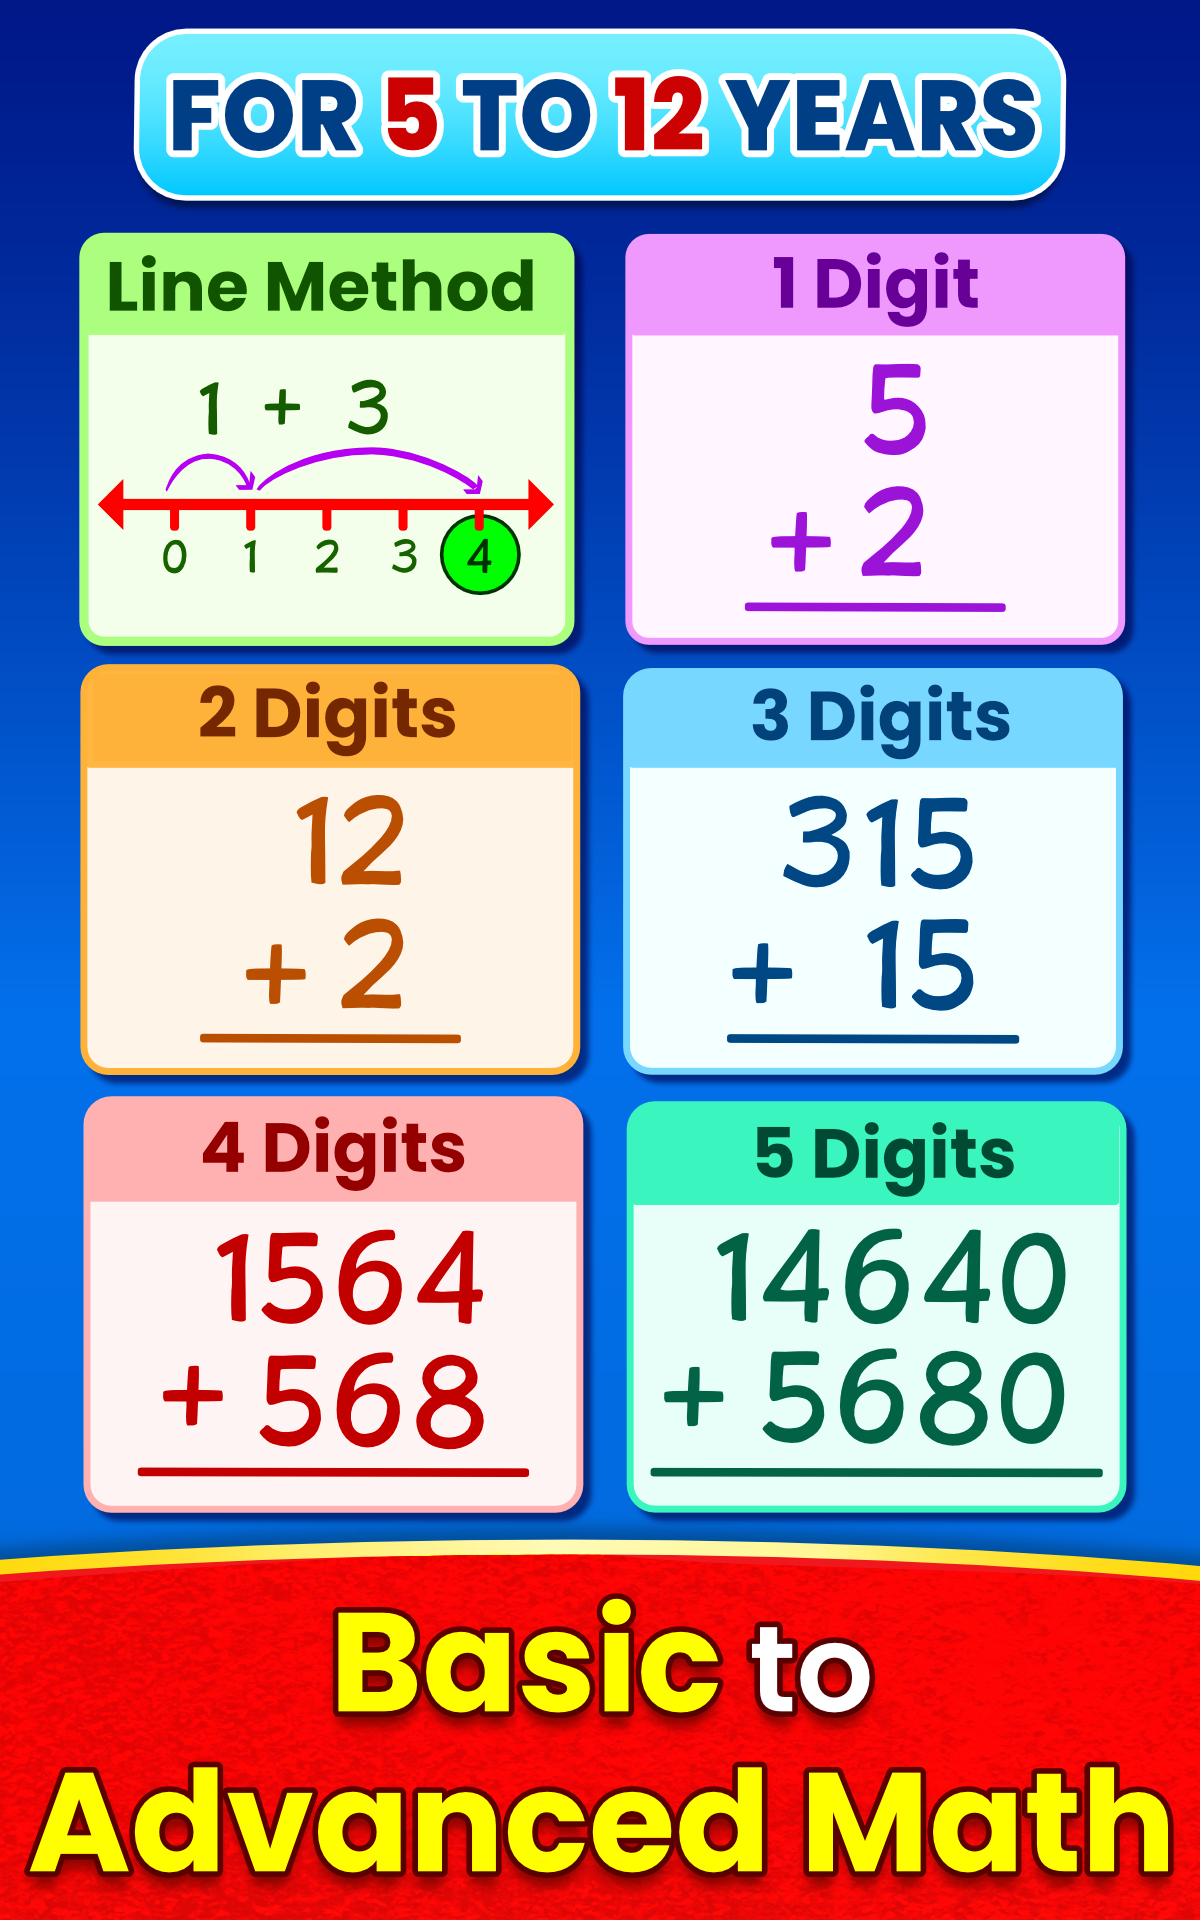 Math Games - Addition, Subtraction, Multiplication and Division Learning Games For 1st, 2nd, 3rd, 4th, 5th Graders, Free on Kindle Fire